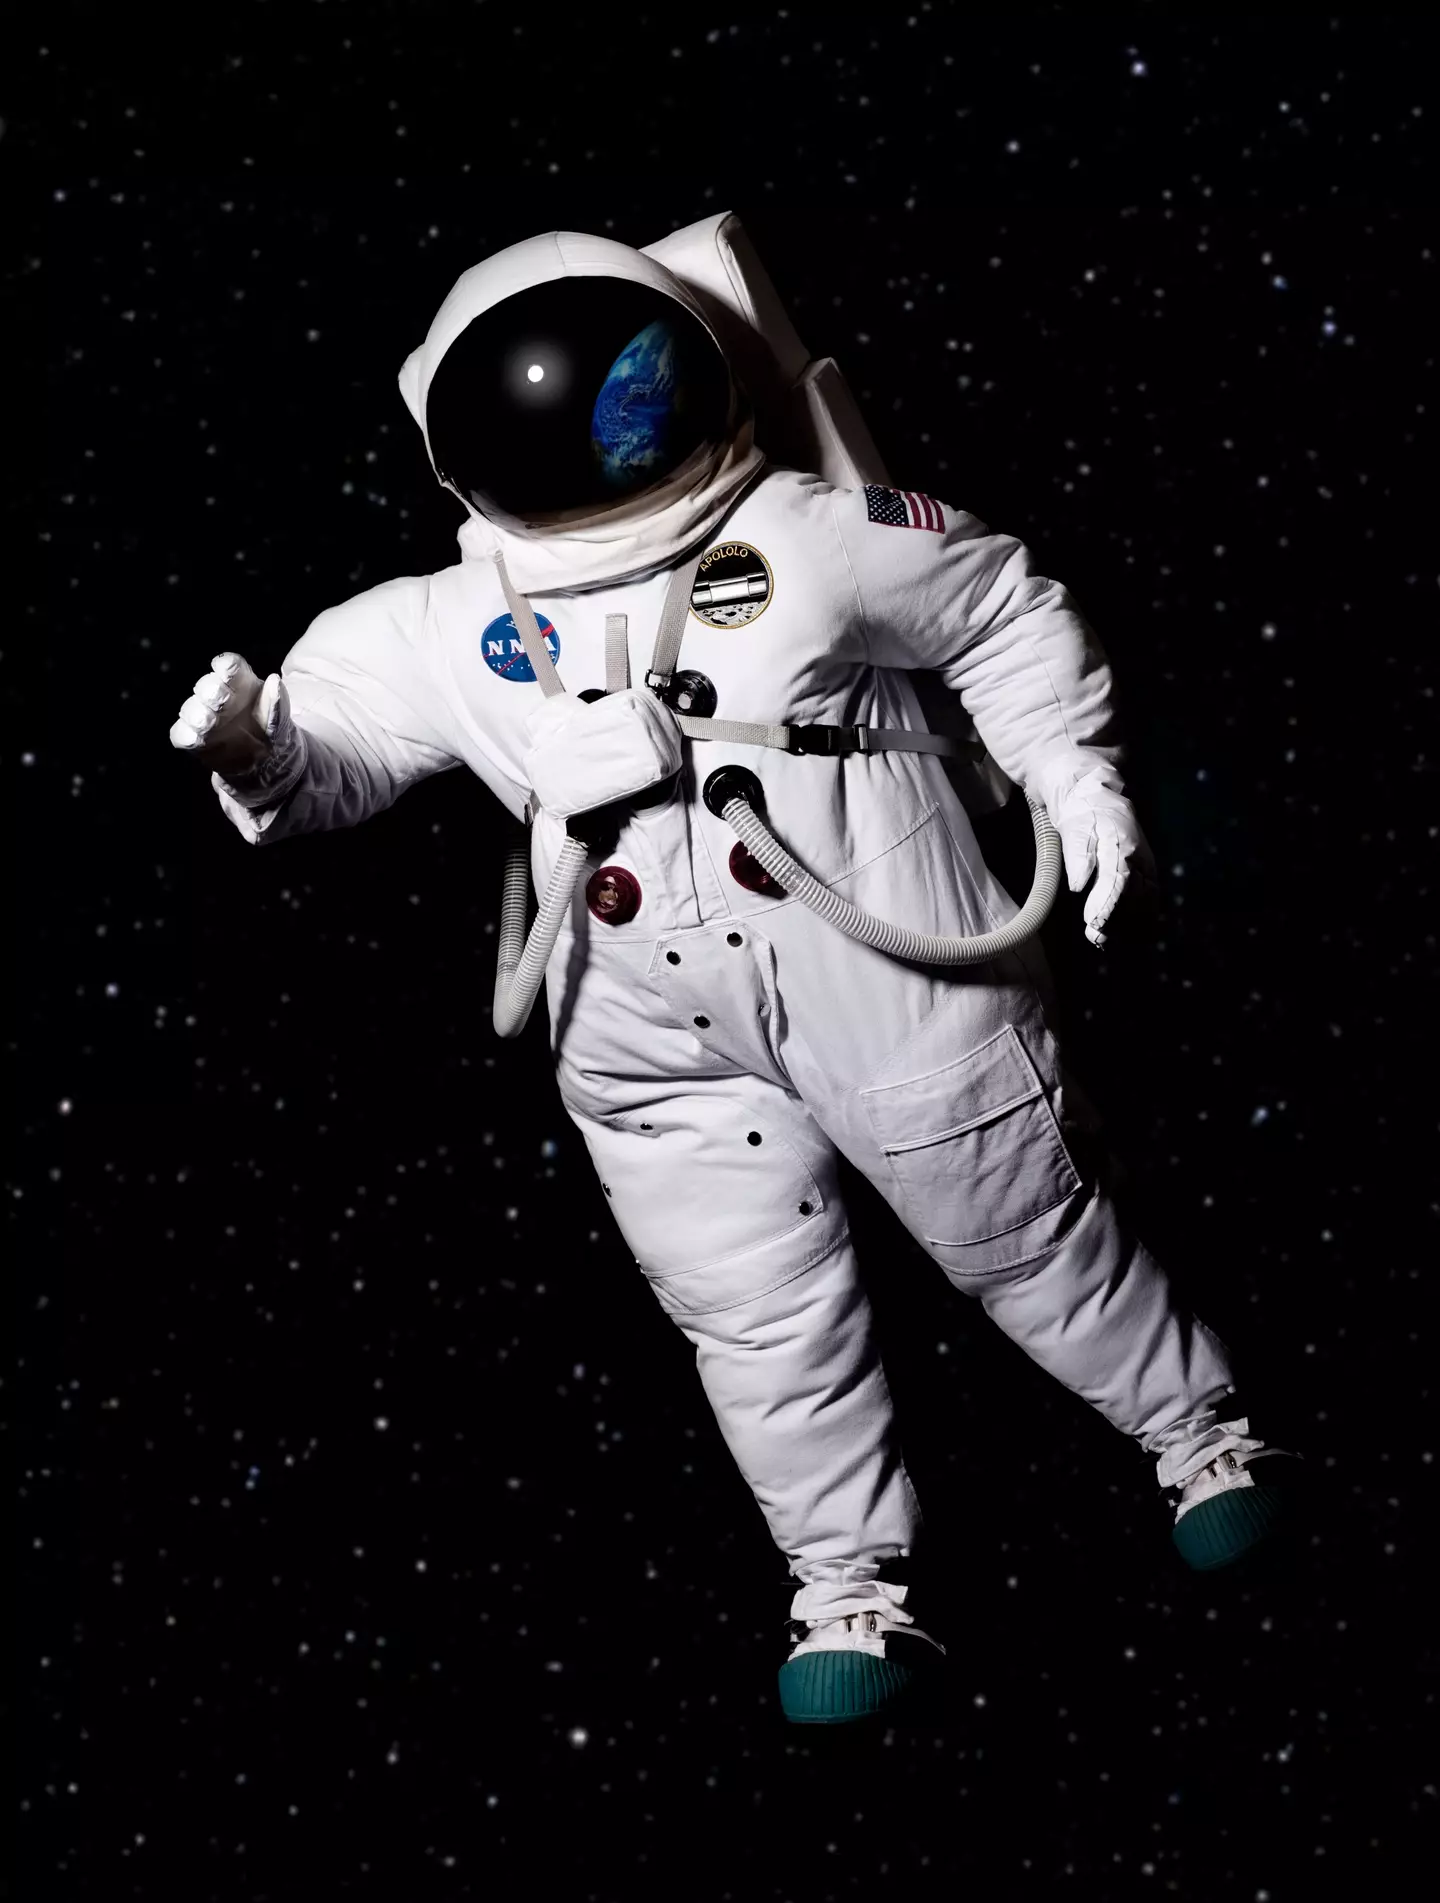 What would happen if you lost your spacesuit?